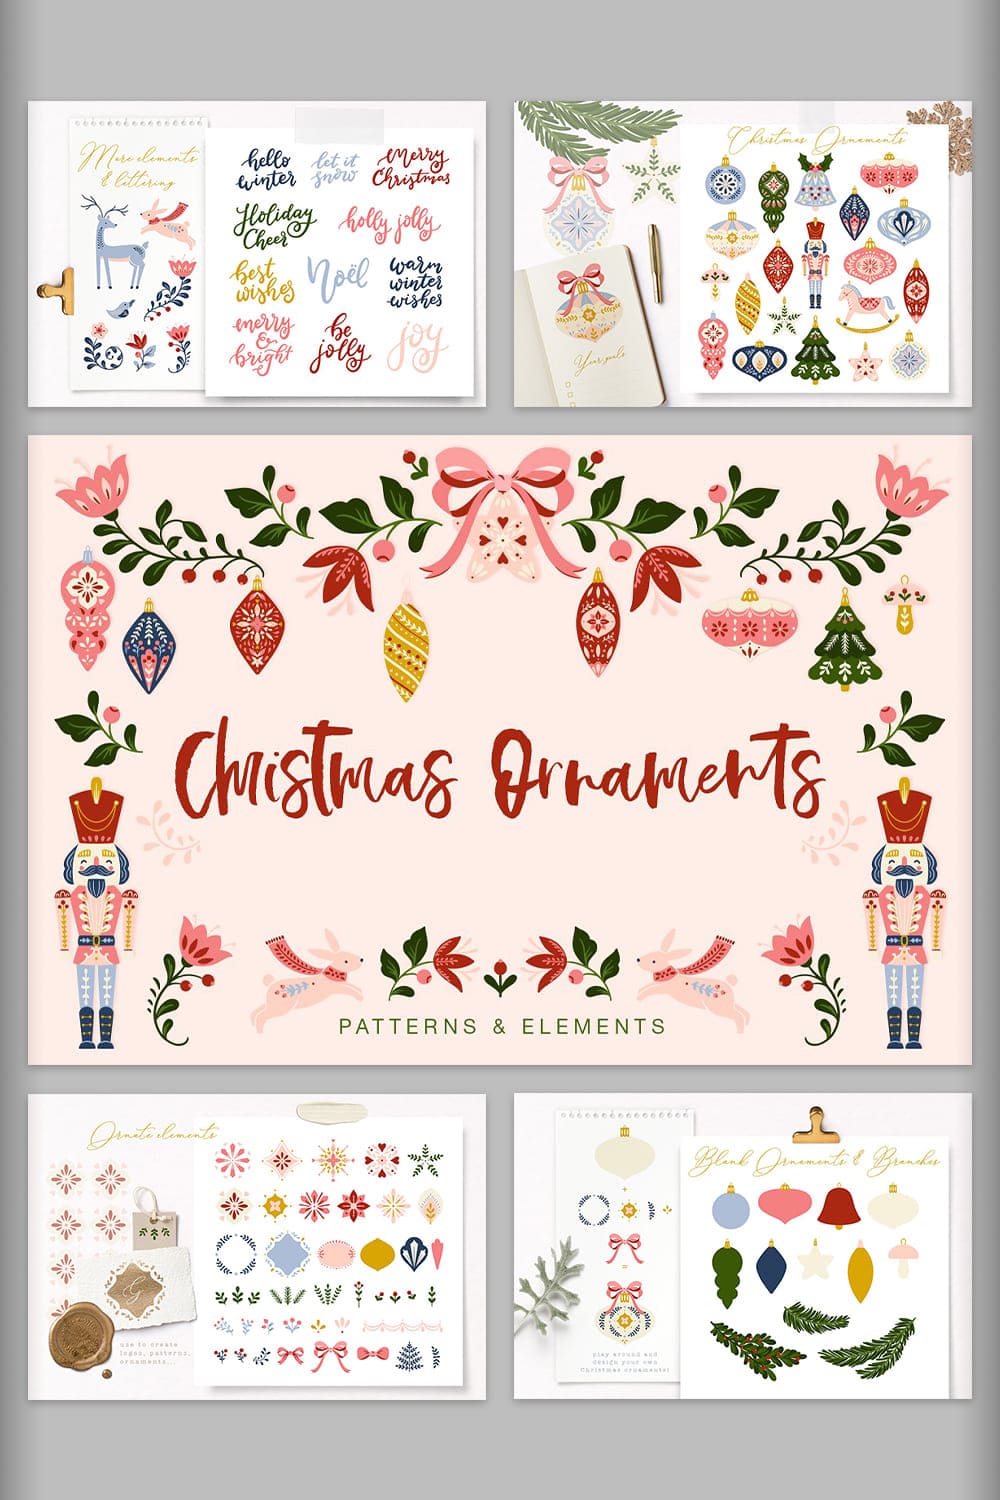 Five Pictures of Christmas Ornaments (Patterns & Elements).